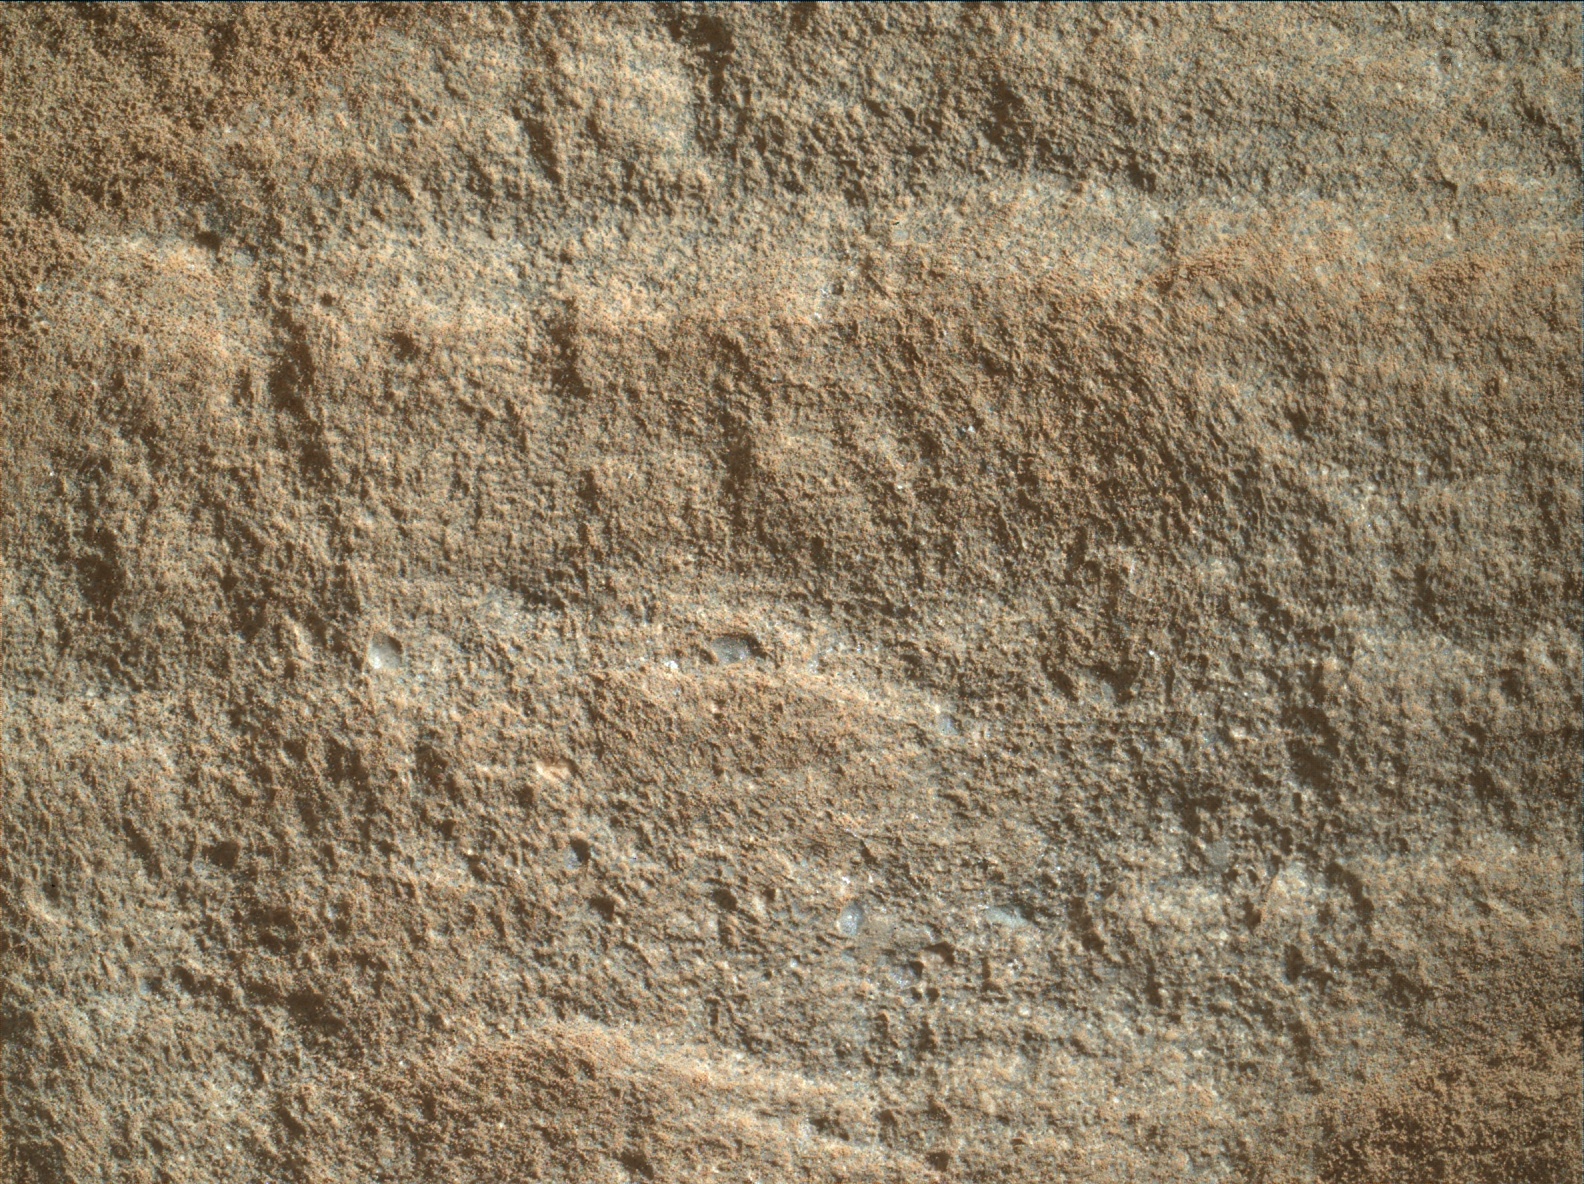 Nasa's Mars rover Curiosity acquired this image using its Mars Hand Lens Imager (MAHLI) on Sol 1131